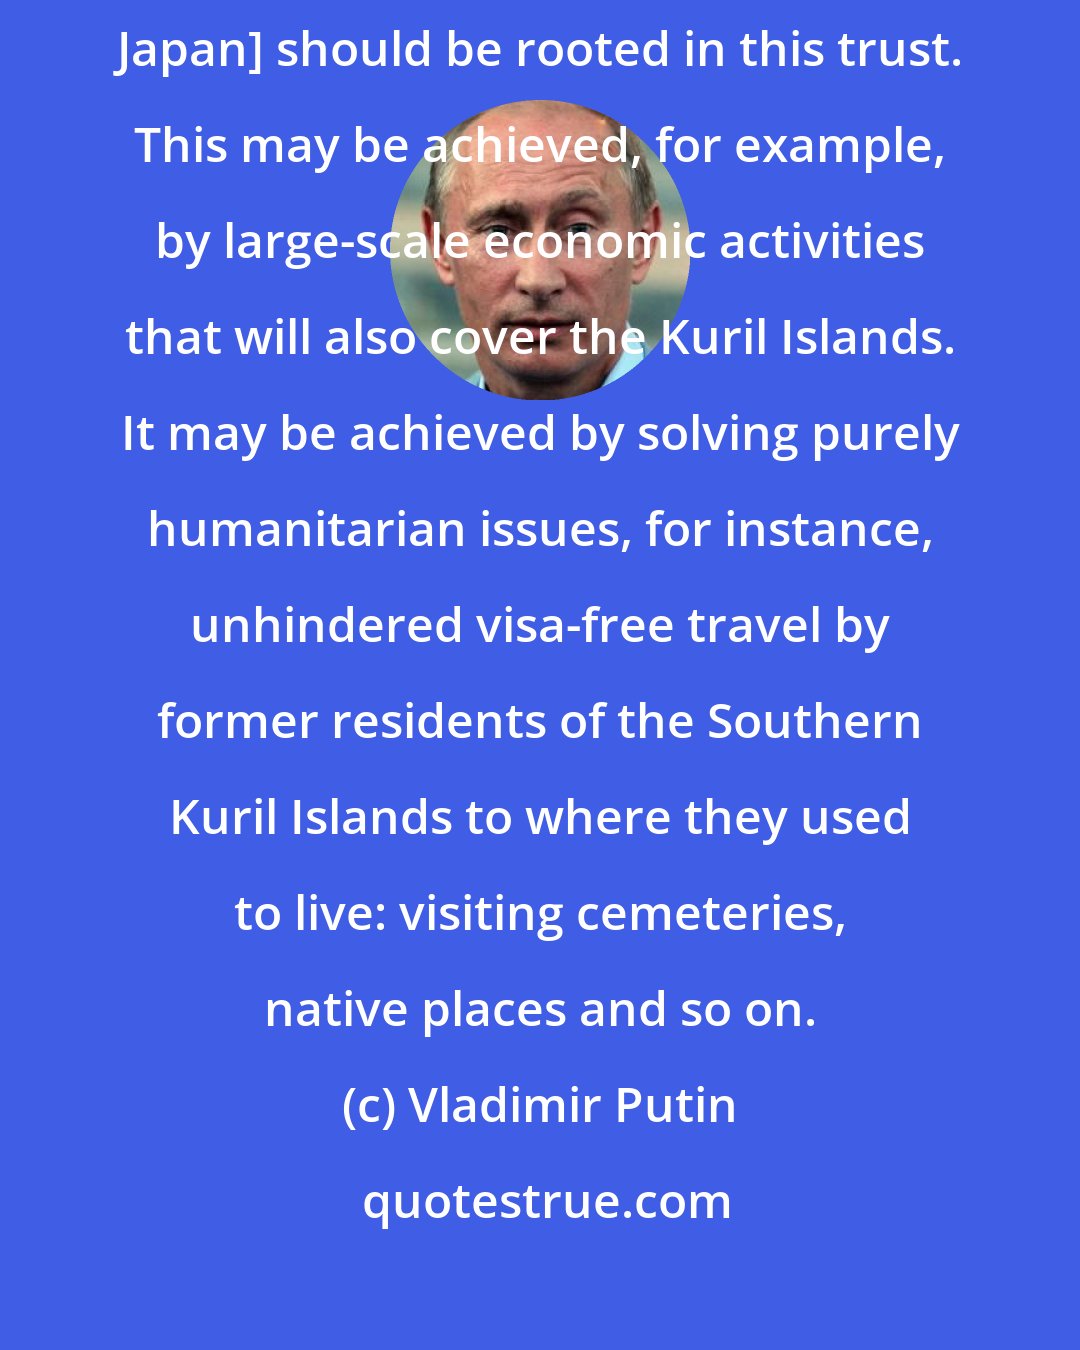 Vladimir Putin: Our agreements on creating the conditions for preparing a peace treaty [with Japan] should be rooted in this trust. This may be achieved, for example, by large-scale economic activities that will also cover the Kuril Islands. It may be achieved by solving purely humanitarian issues, for instance, unhindered visa-free travel by former residents of the Southern Kuril Islands to where they used to live: visiting cemeteries, native places and so on.